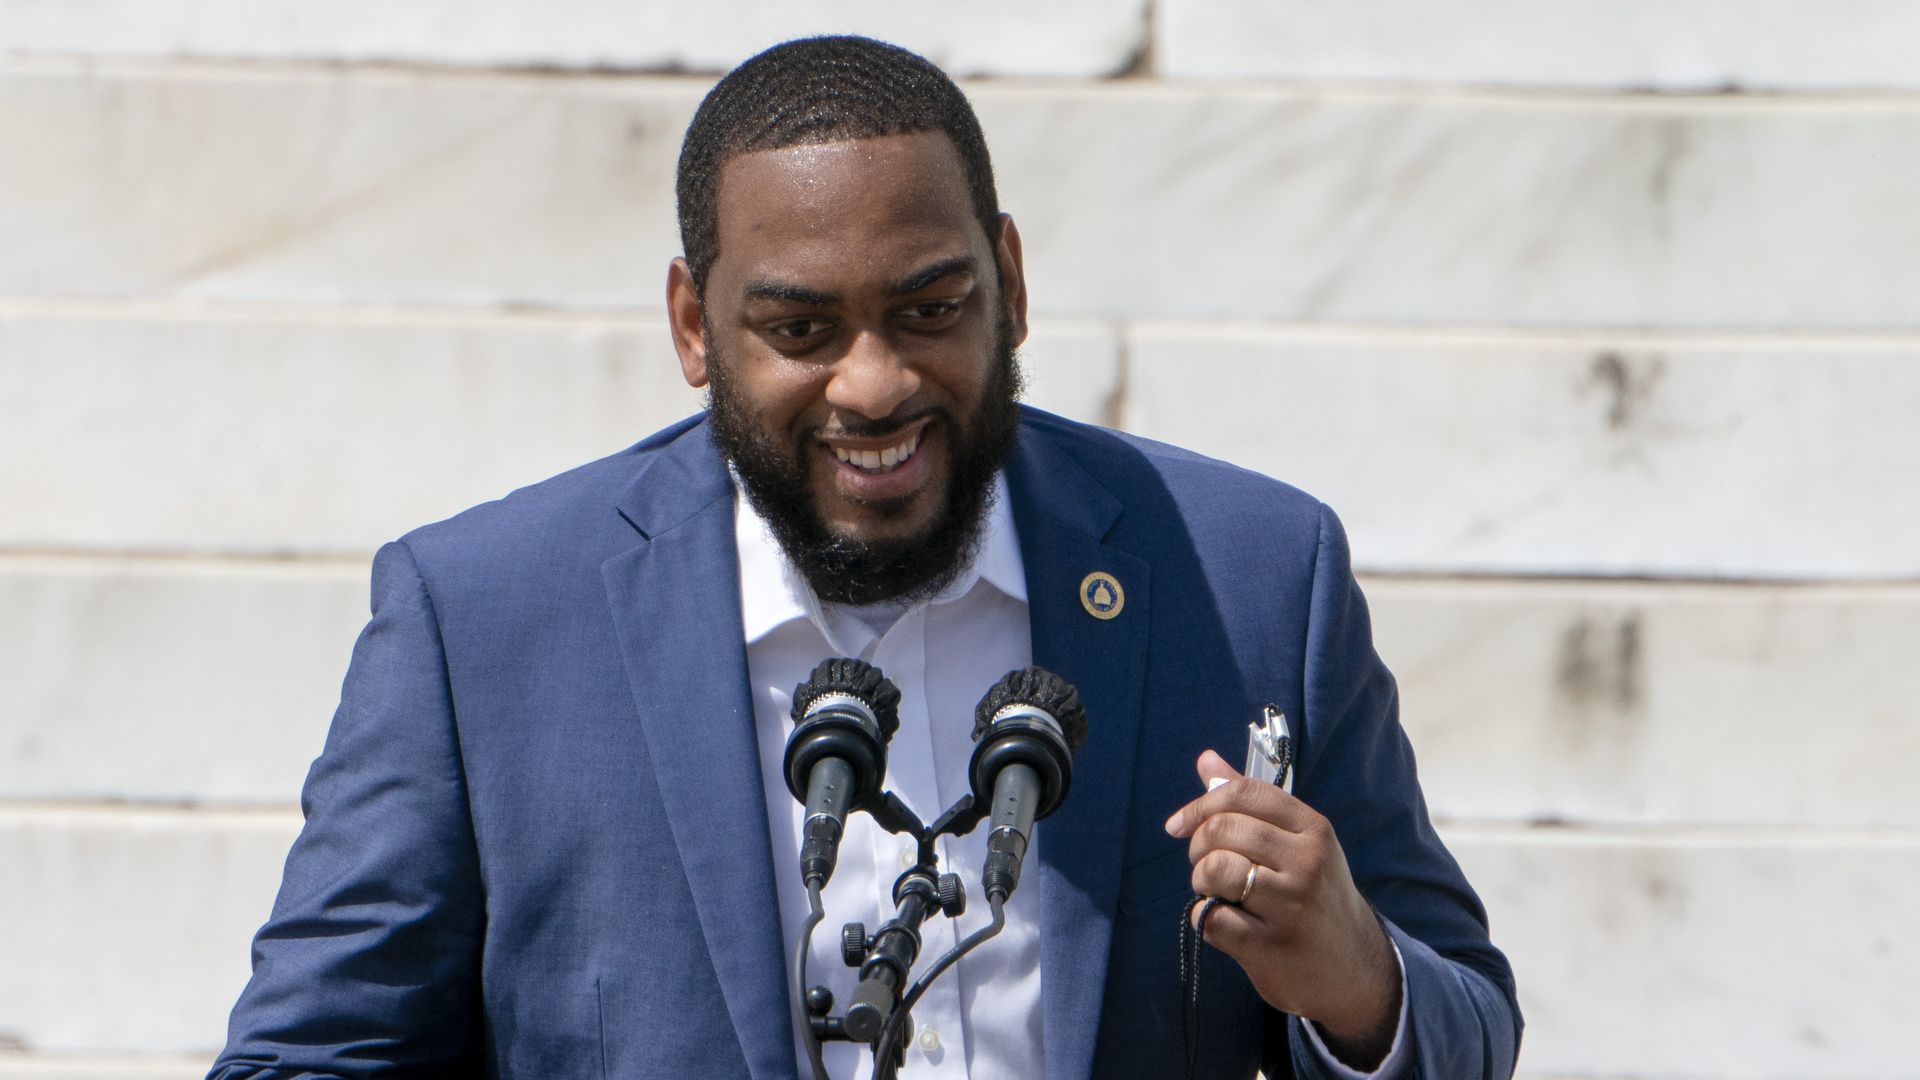 Rep. Charles Booker (D-KY) speaks at the March on Washington at the Lincoln Memorial on August 28, 2020 in Washington.